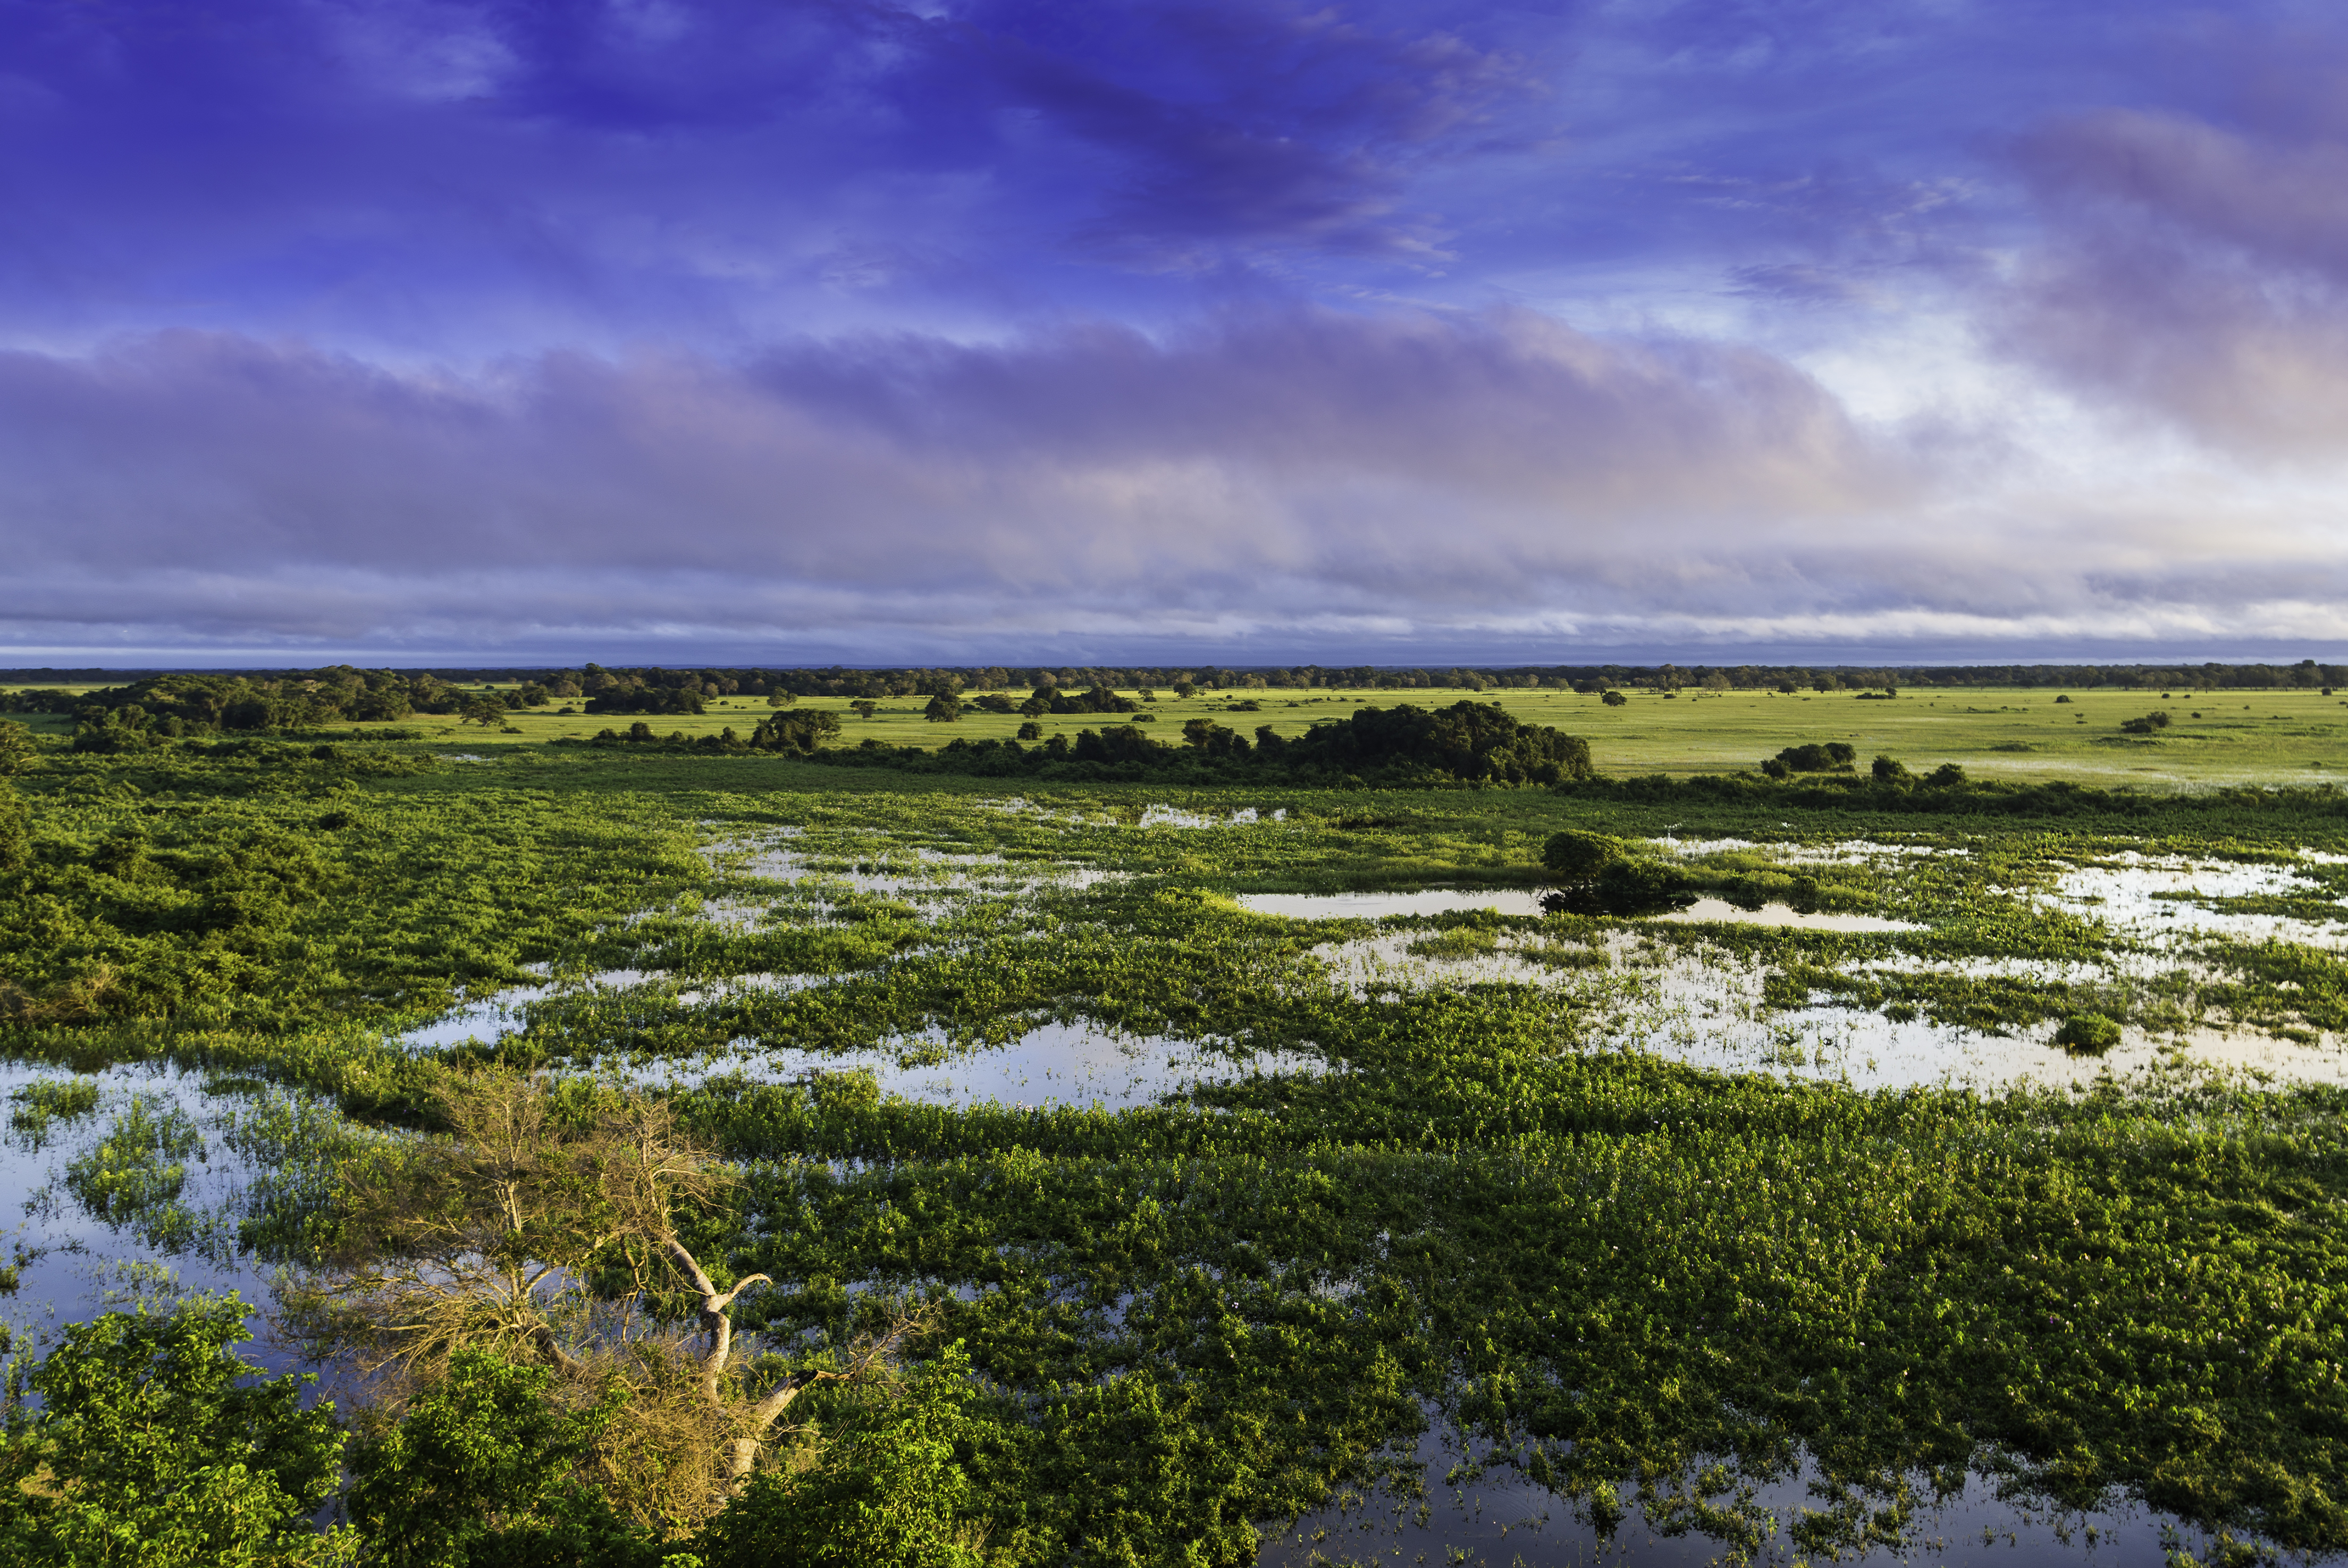 Hydroelectric Dams Threaten Pantanal - One of the World's Great Wetland